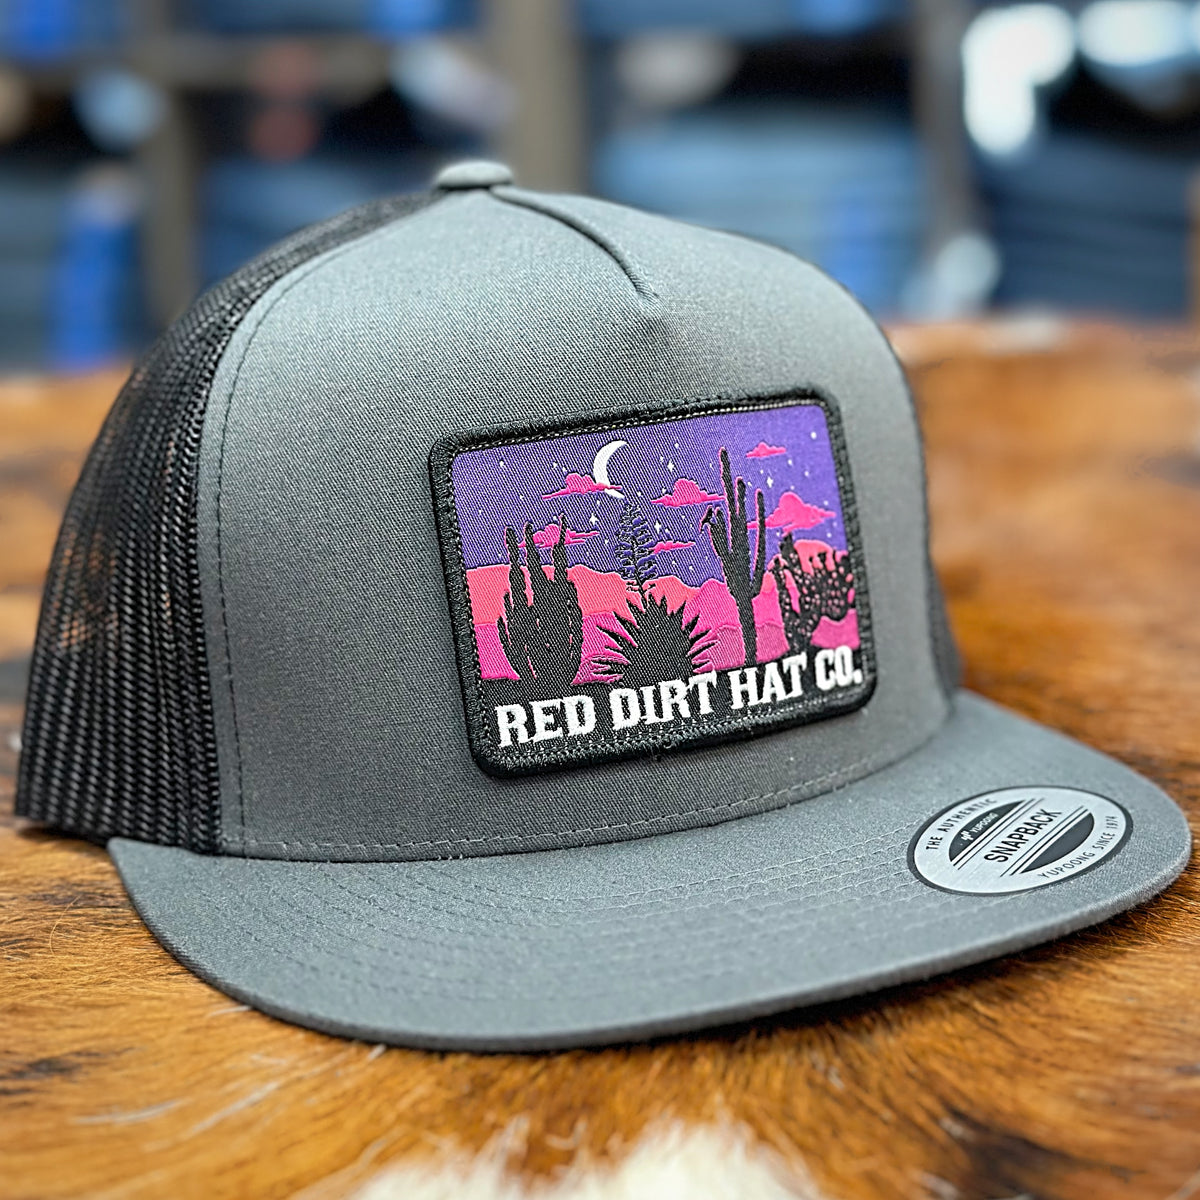 Red Dirt Hat Co. "Nightfall" Hat in Charcoal/Black